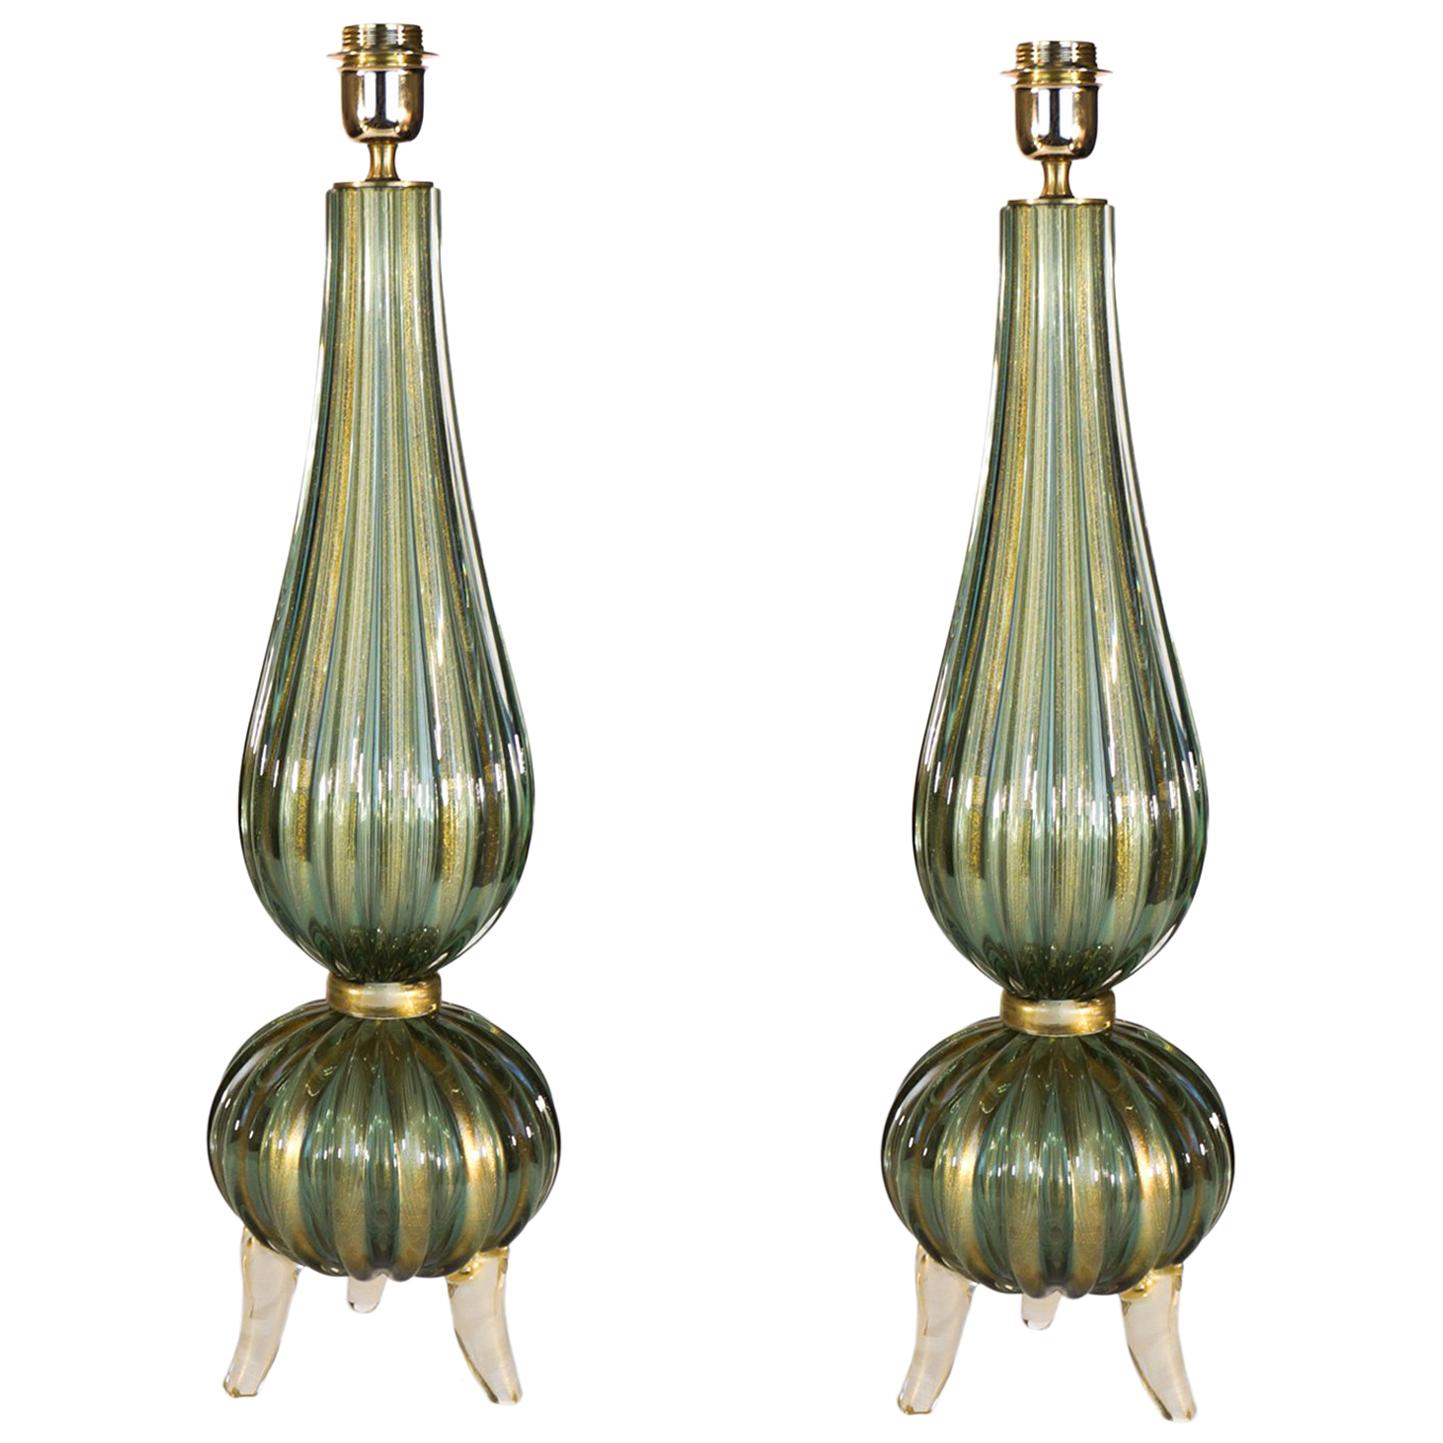 Toso Mid-Century Modern Green Gold Pair of Murano Glass Table Lamps Signed, 1980